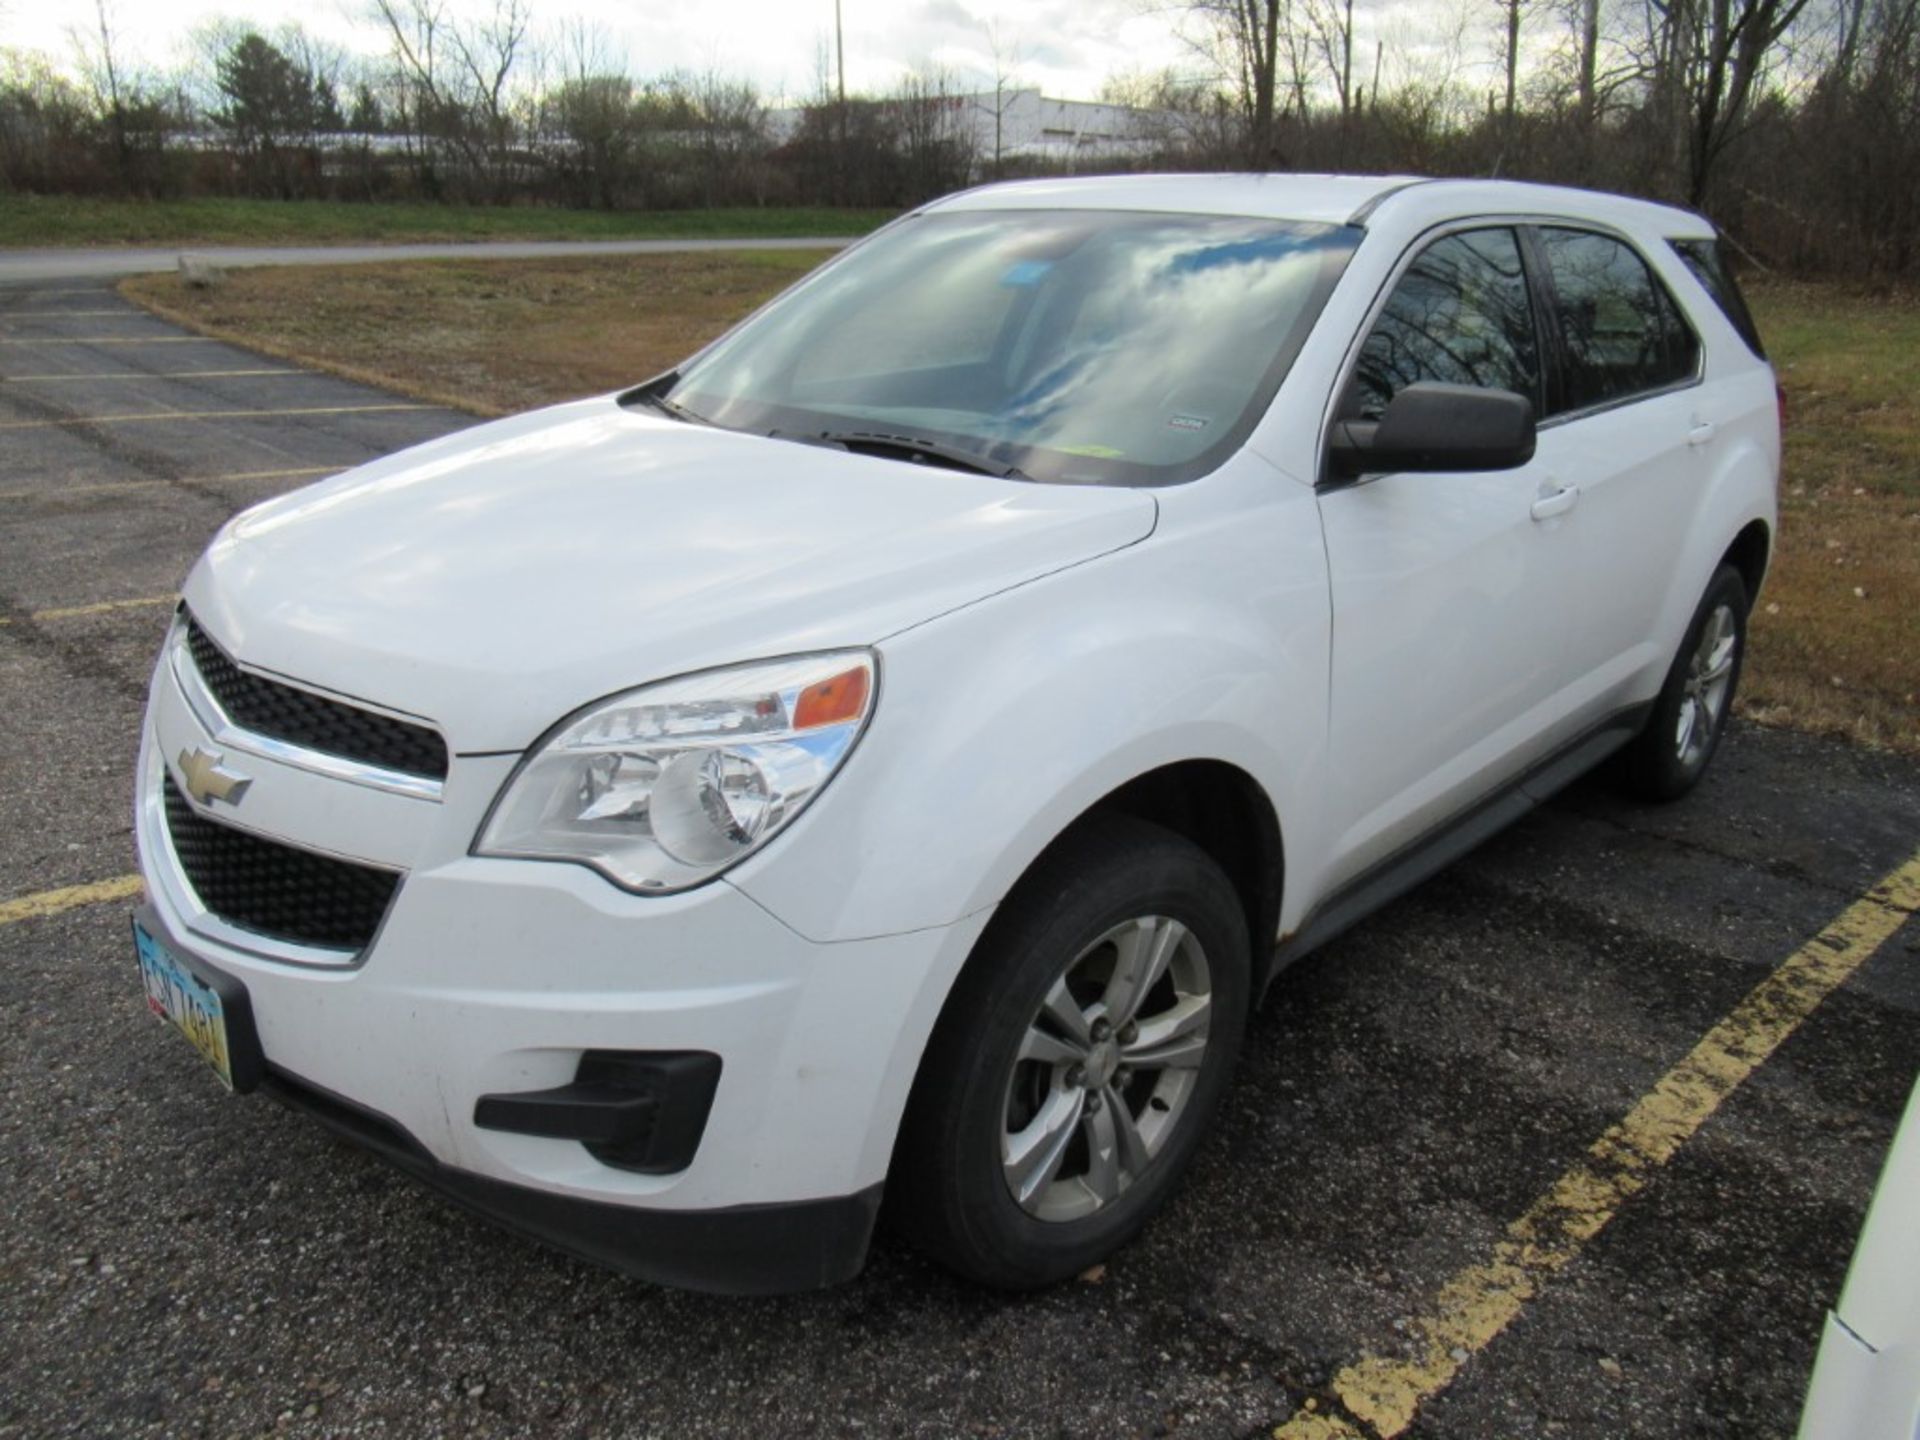 2013 Chevrolet Equinox SUV, VIN 2GNFLCEK2D6152539, Automatic, Cruise Control, AC, PW, PL, PS, AM/FM, - Image 2 of 26